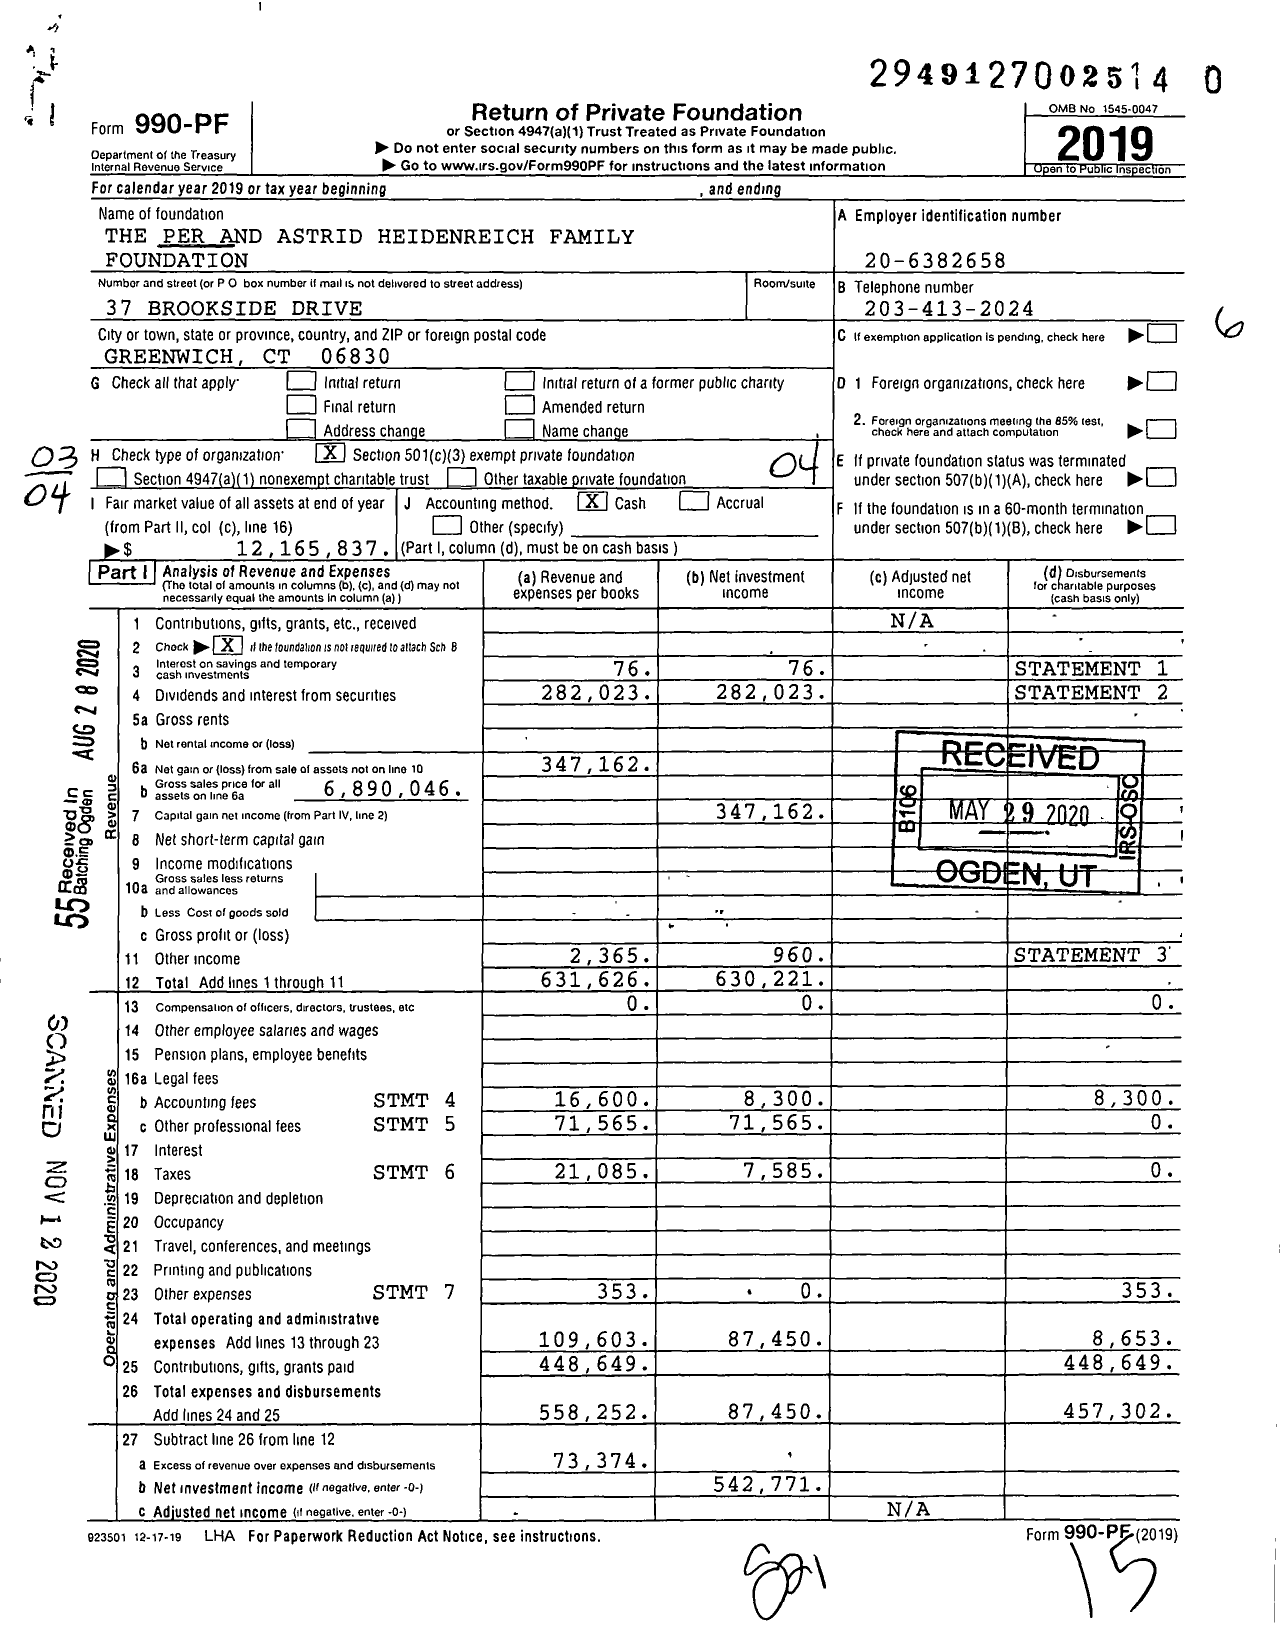 Image of first page of 2019 Form 990PF for The Per and Astrid Heidenreich Family Foundation